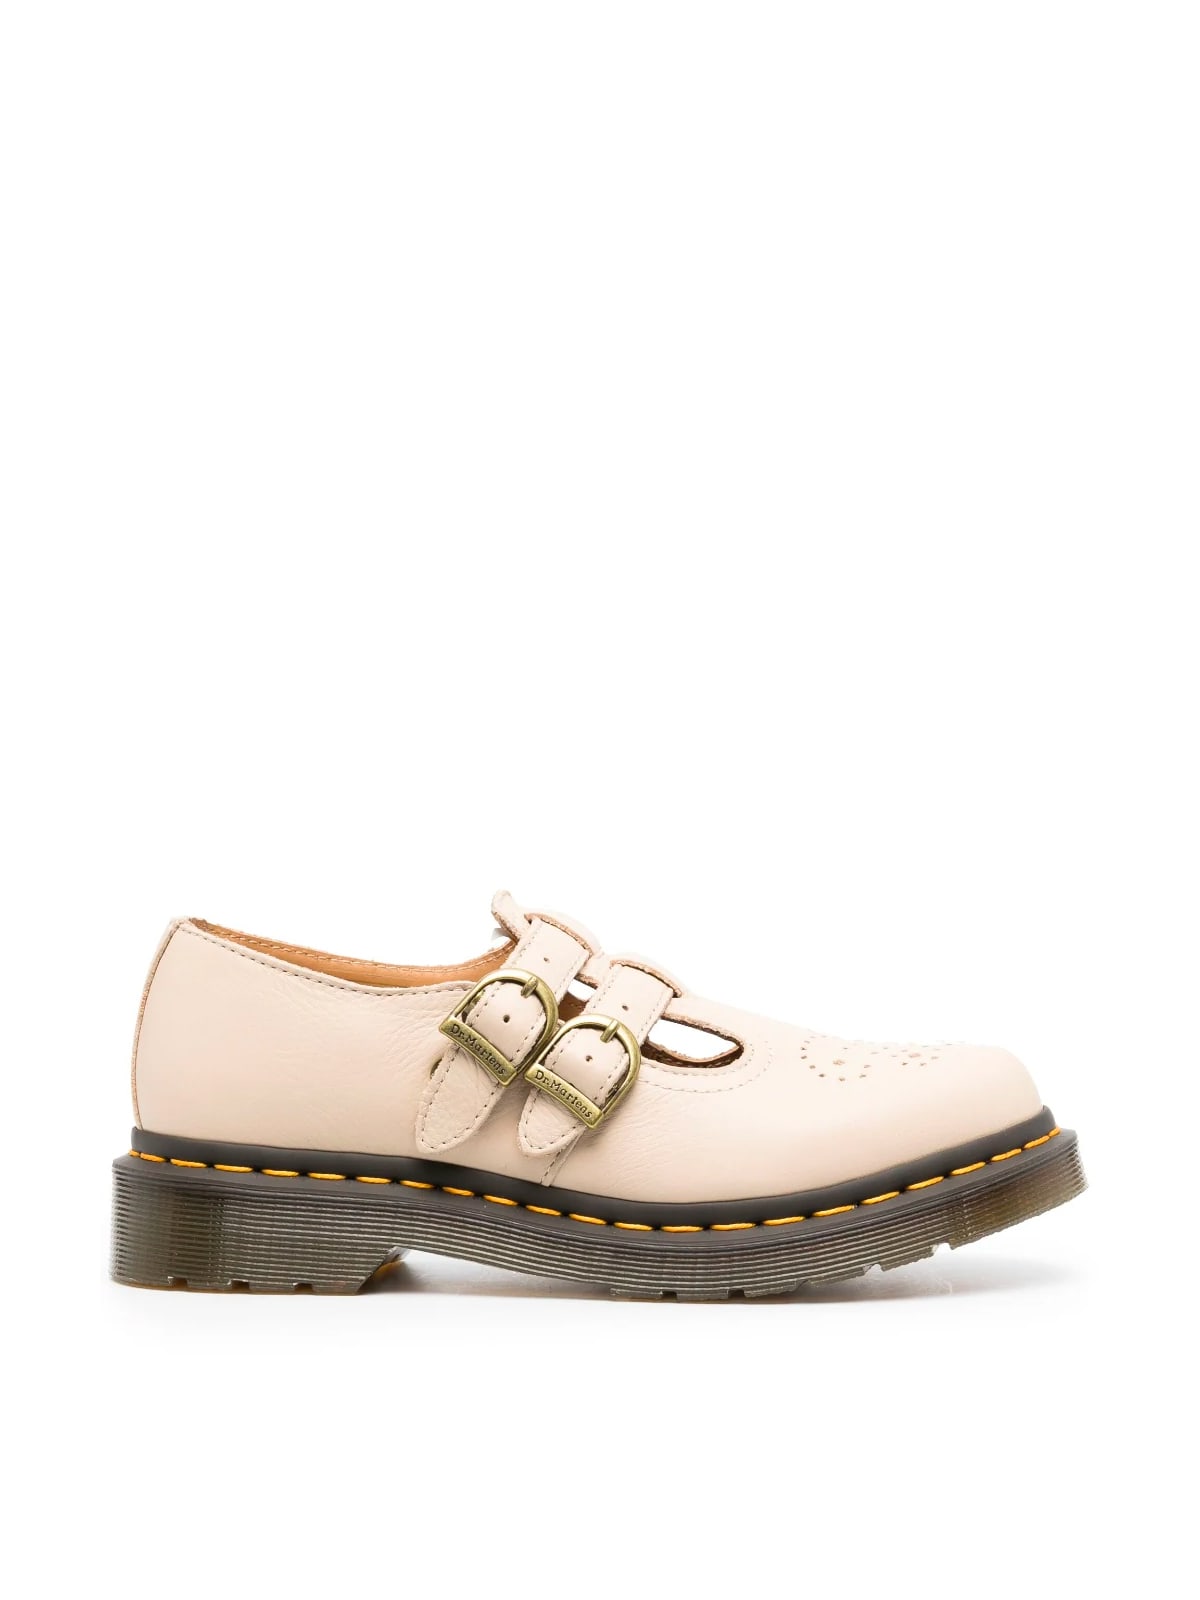 8065 Virginia Leather Mary Jane Shoes in Parchment Beige